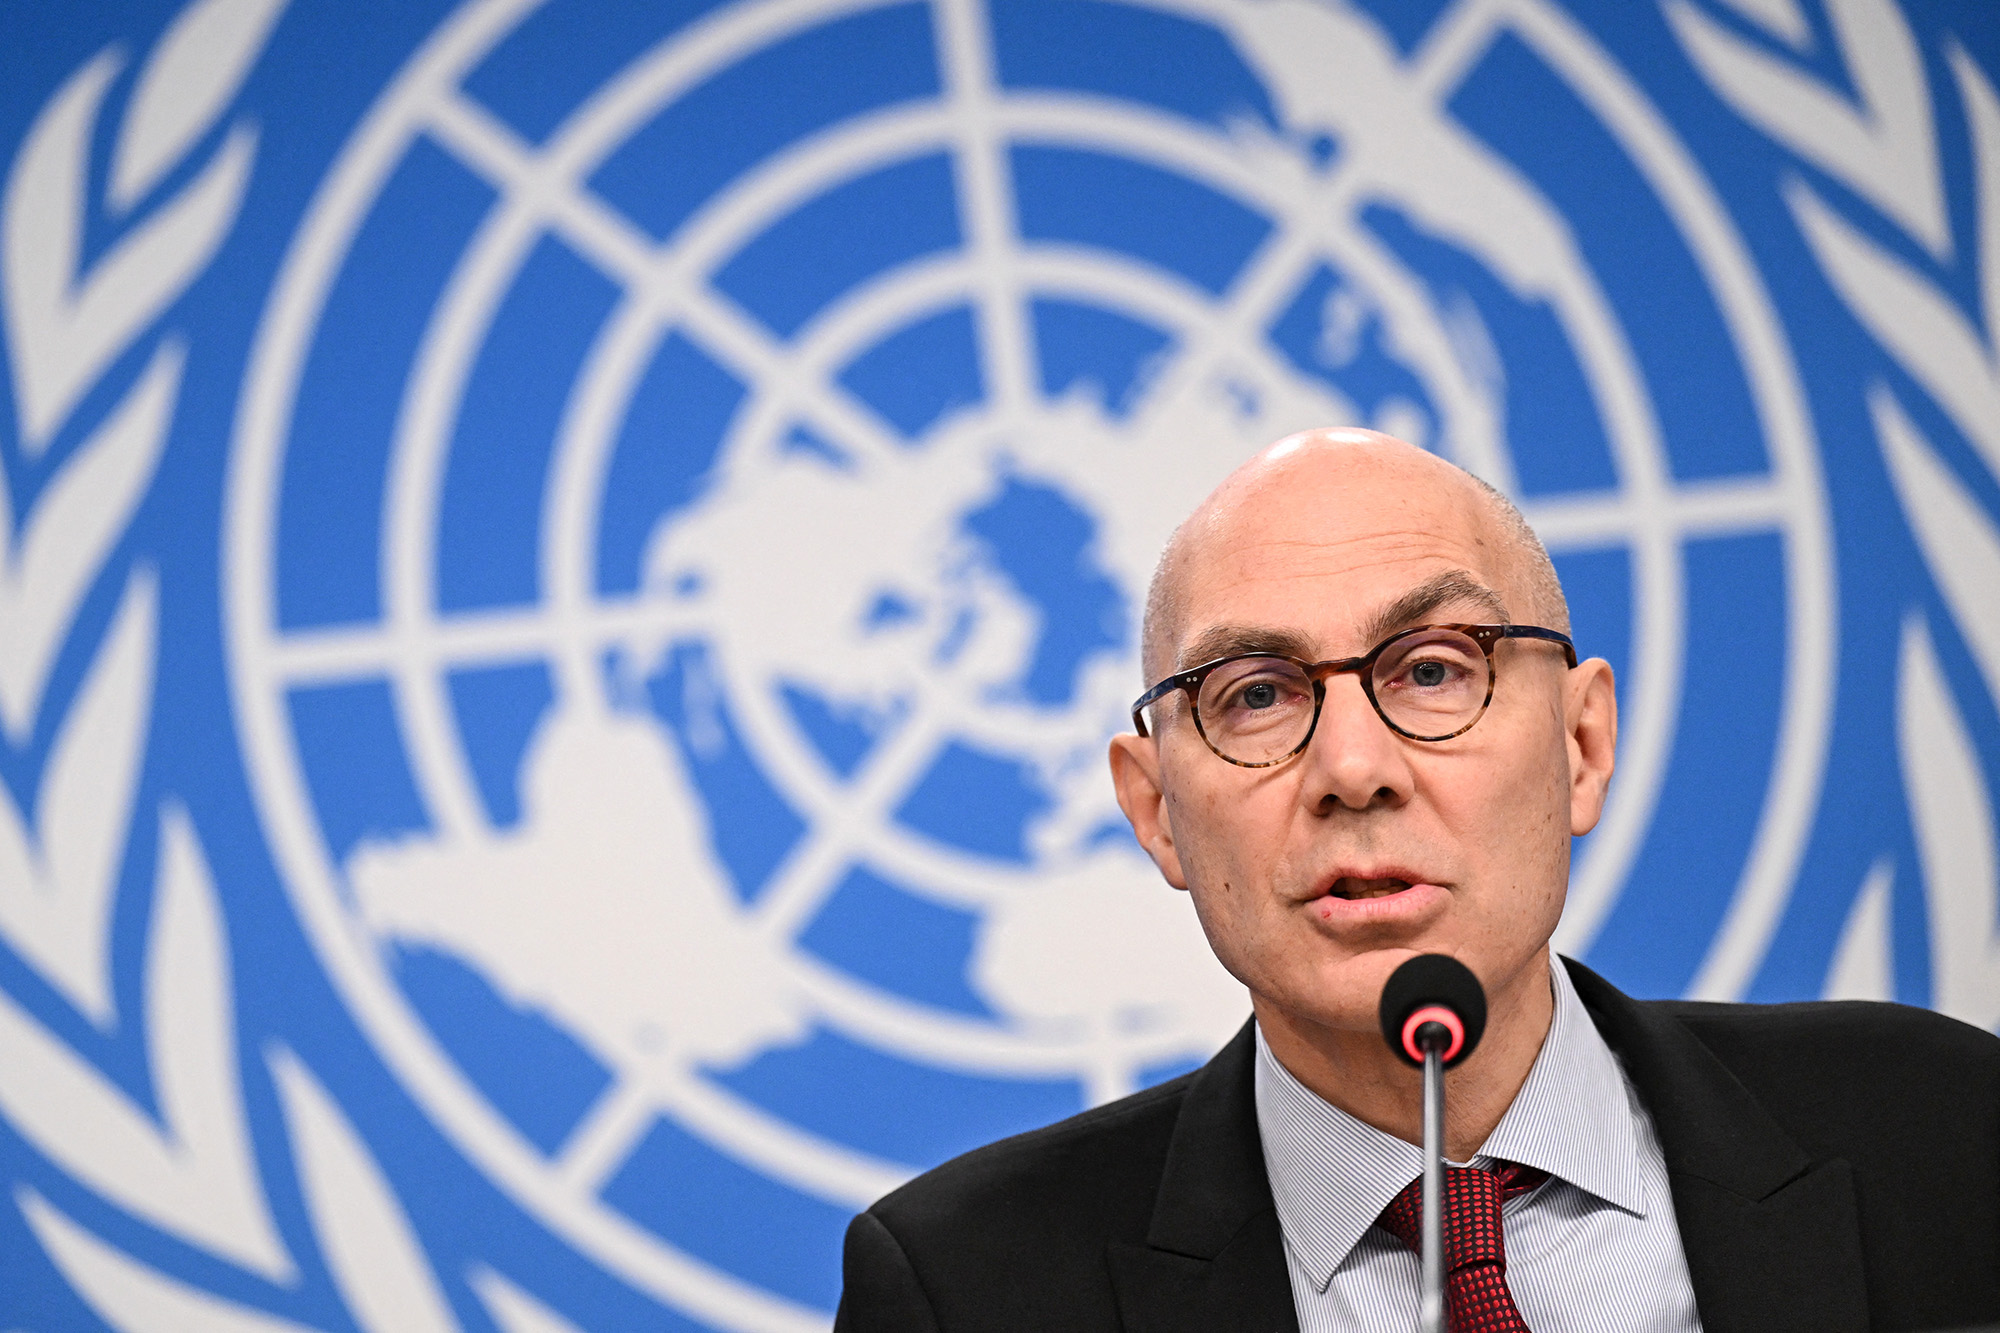 UN High Commissioner for Human Rights Volker Turk addresses a press conference in Geneva, Switzerland, on December 6.